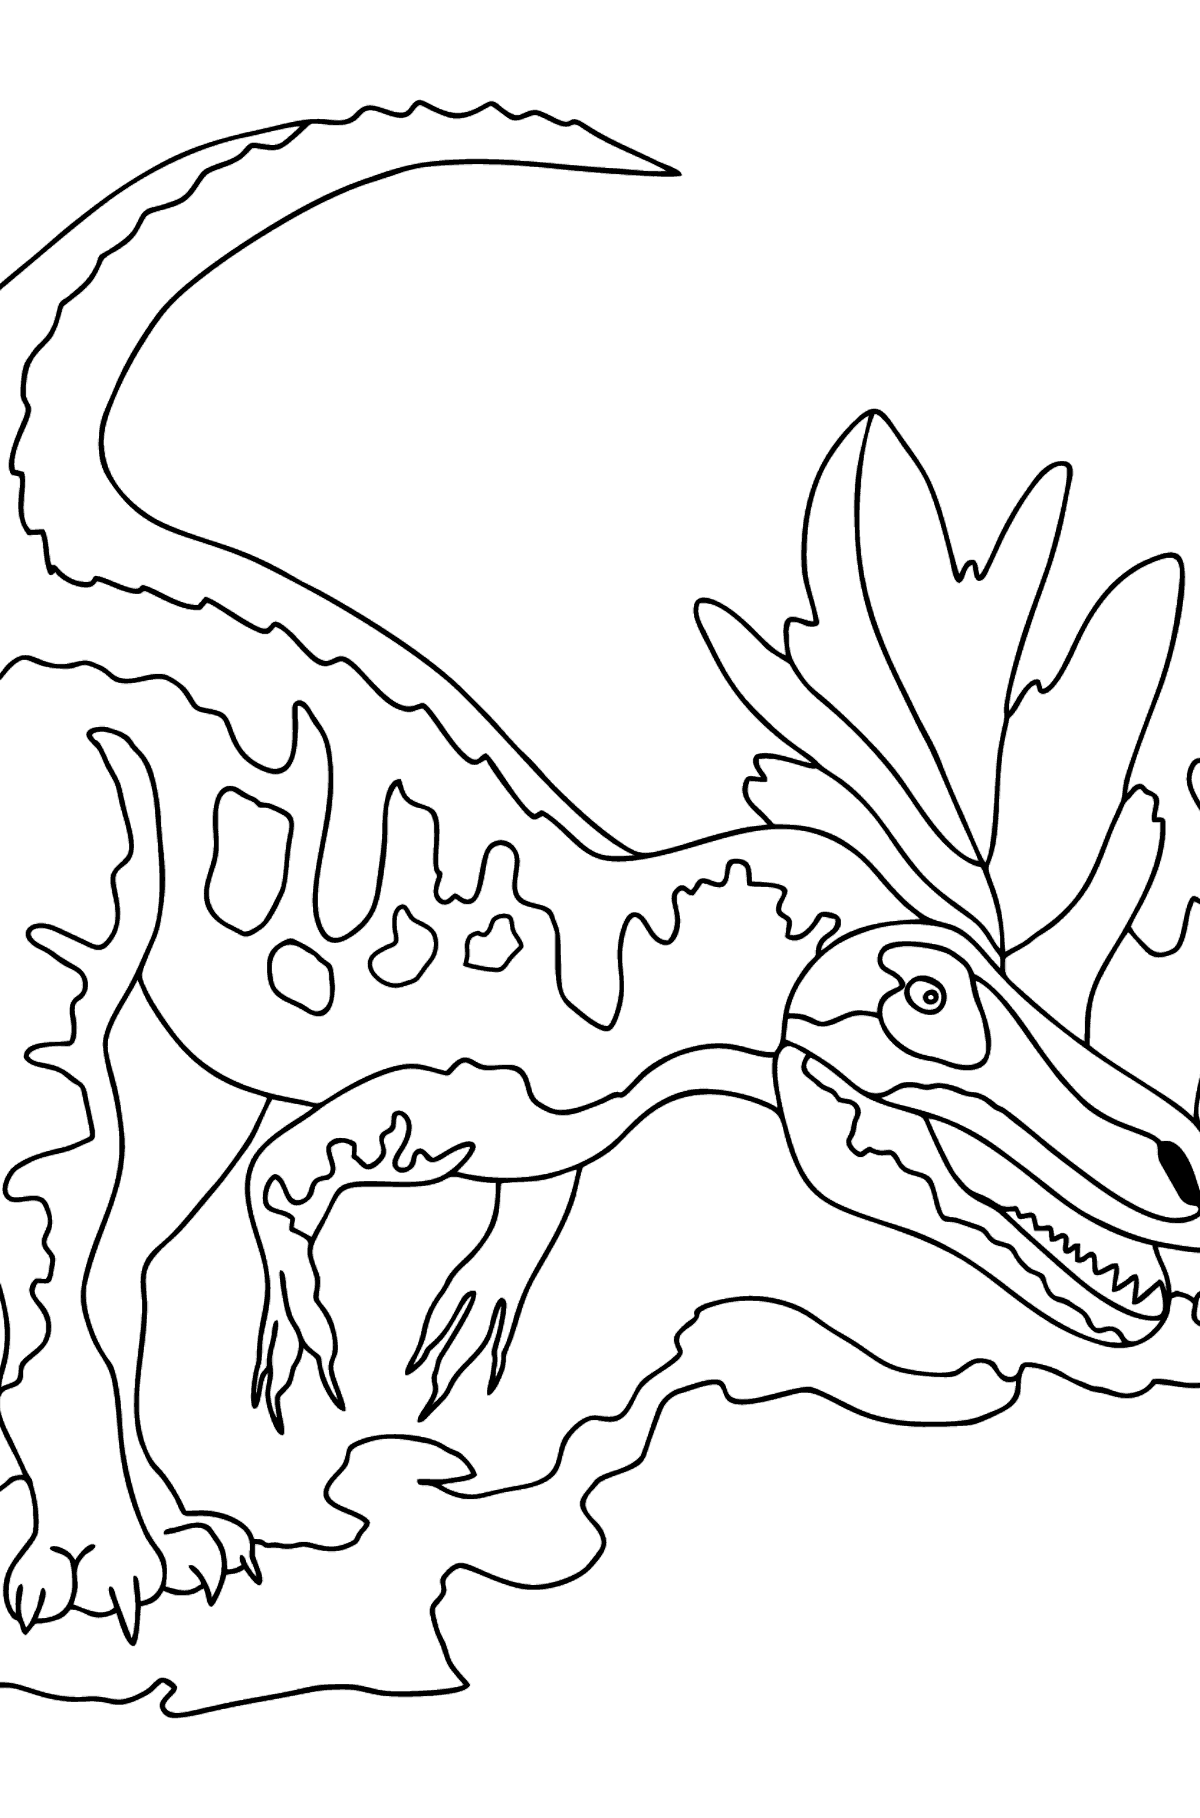 Allosaurus Coloring Page (difficult) - Coloring Pages for Kids